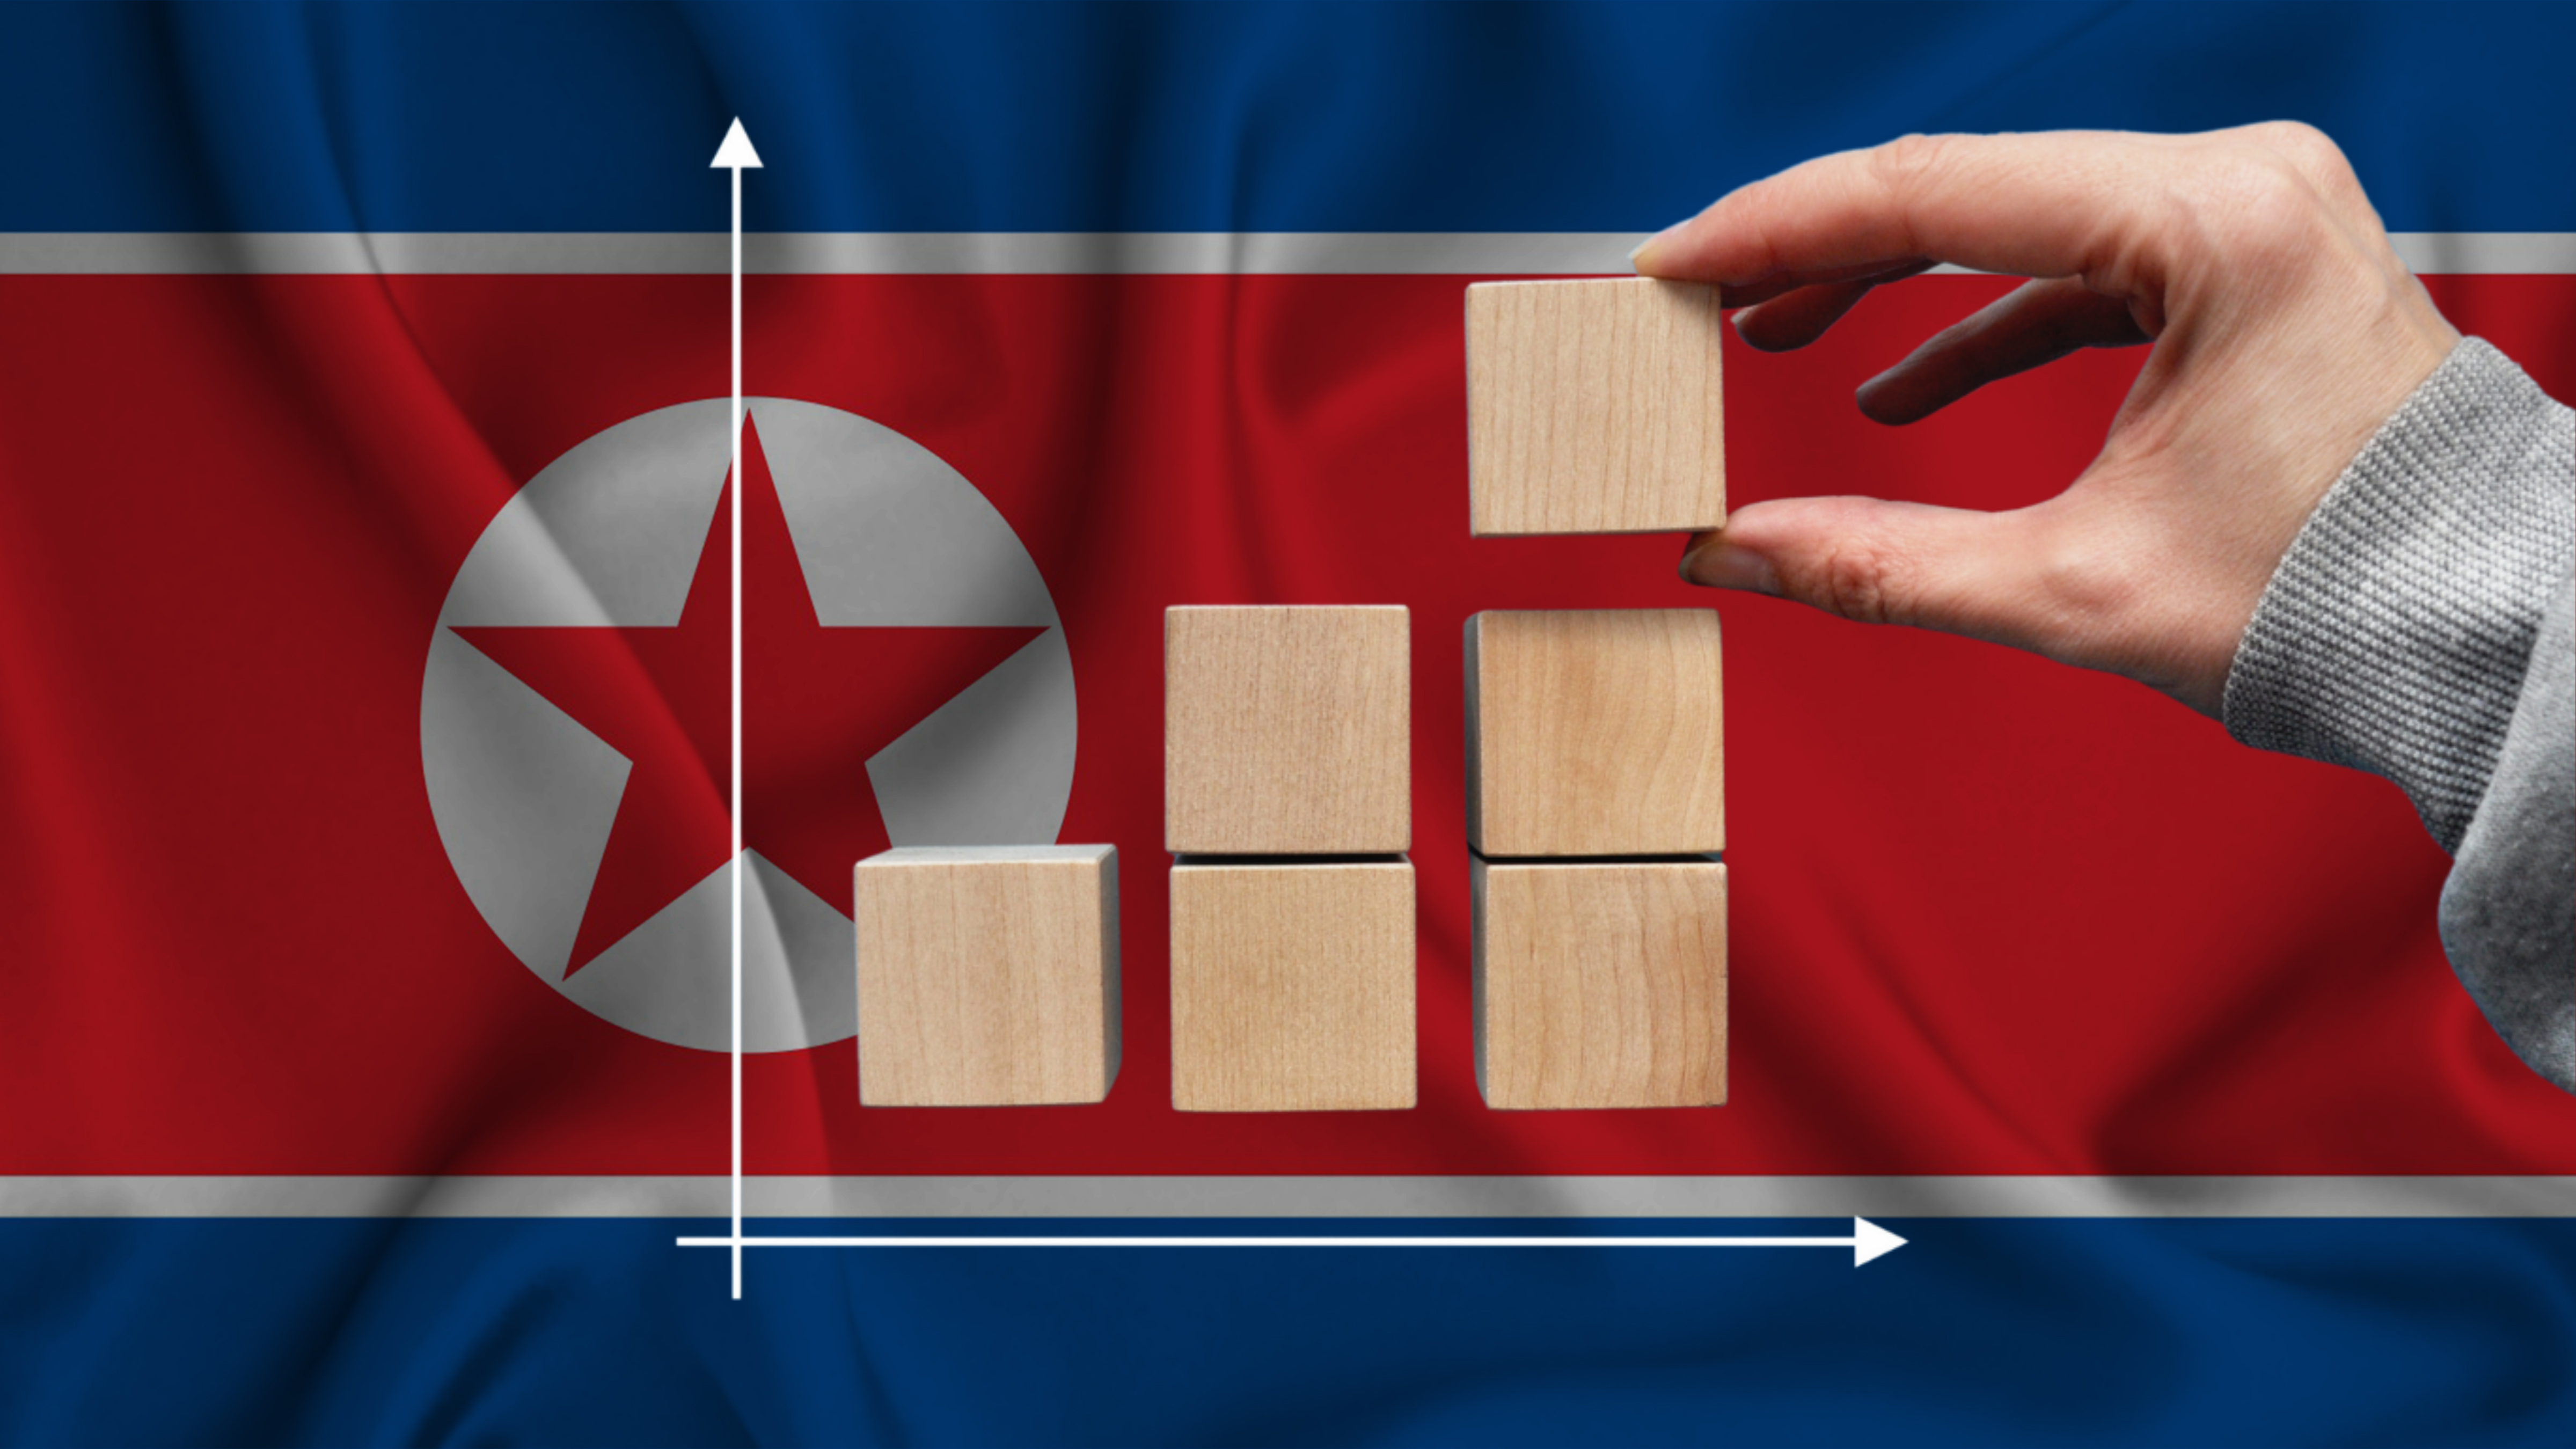 Capacity Building and Development Cooperation for North Korea